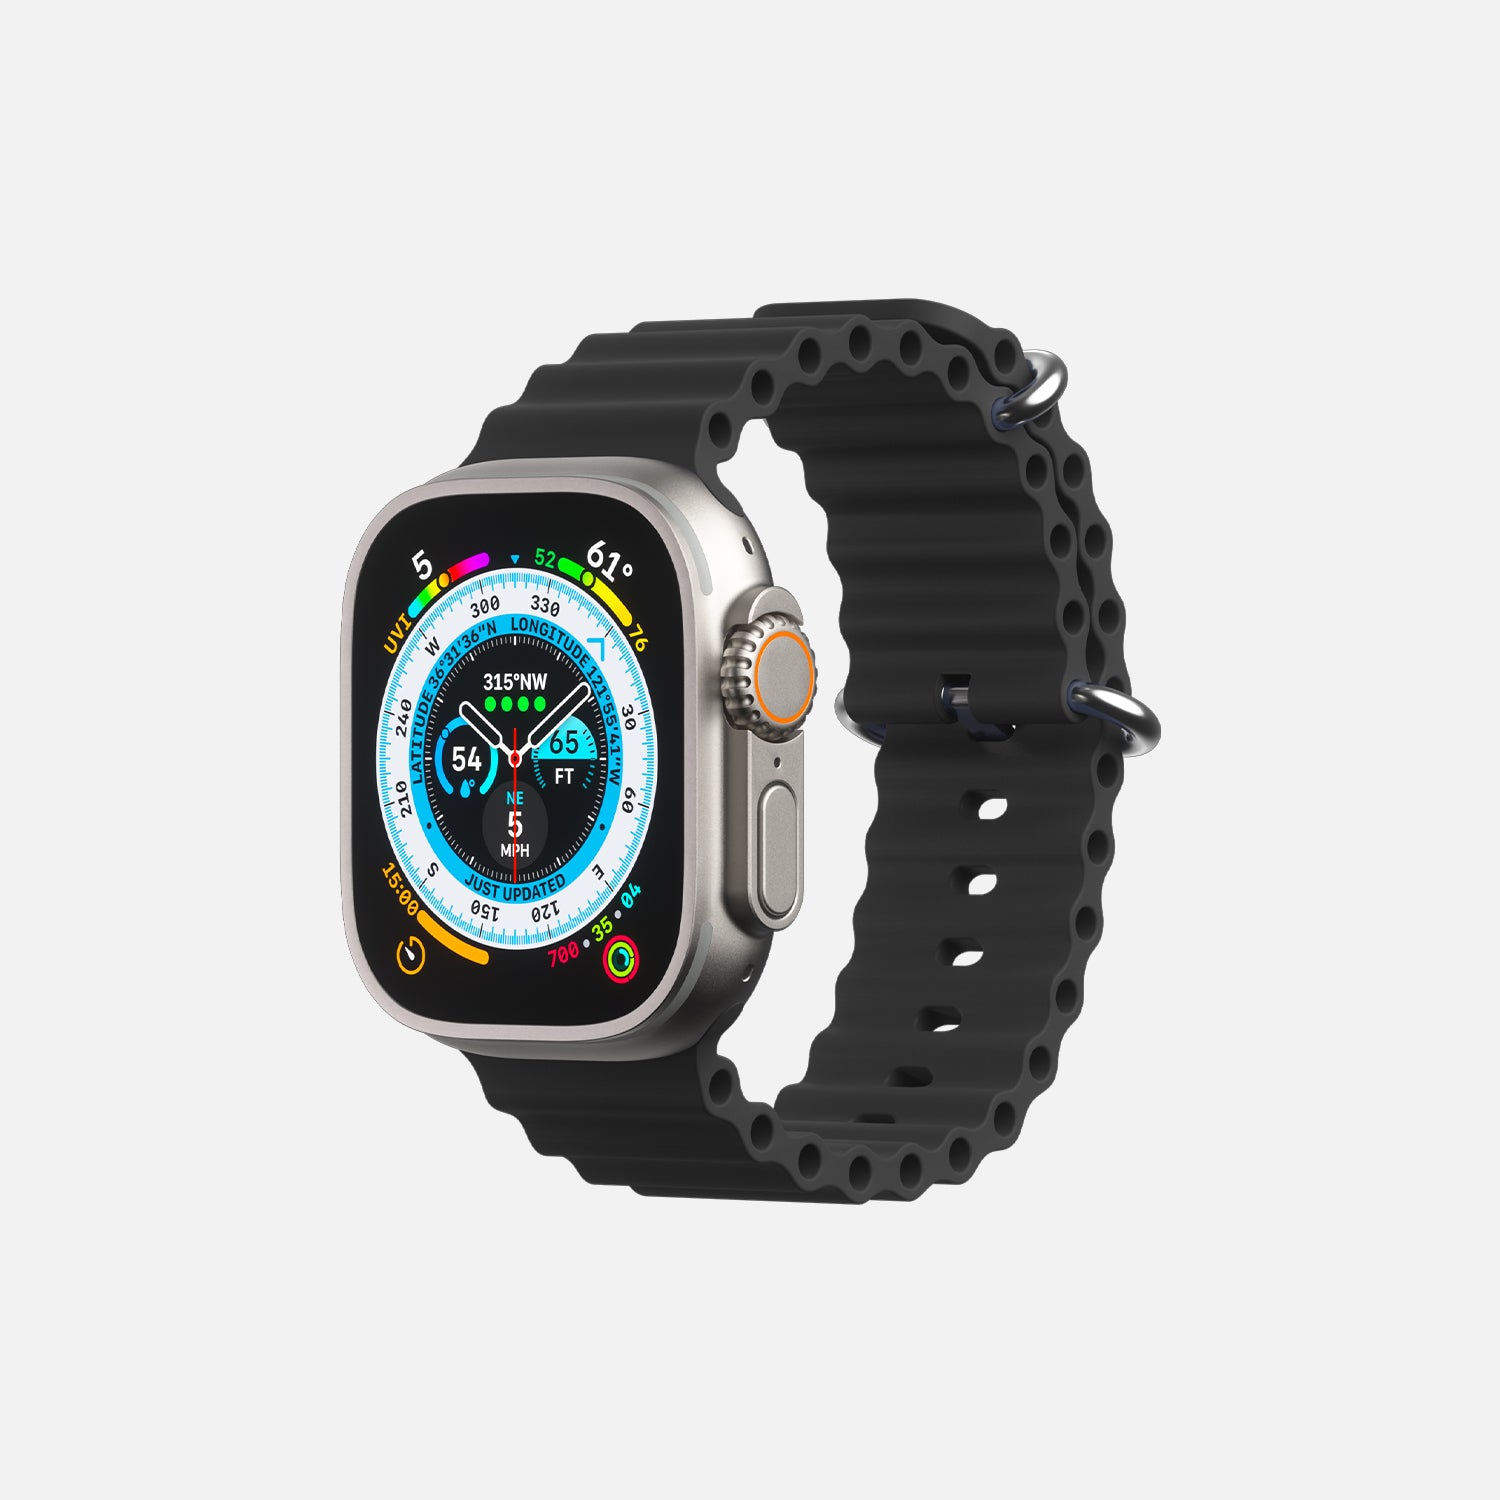 Apple Smartwatch with fitness tracking display and black sports band on white background.